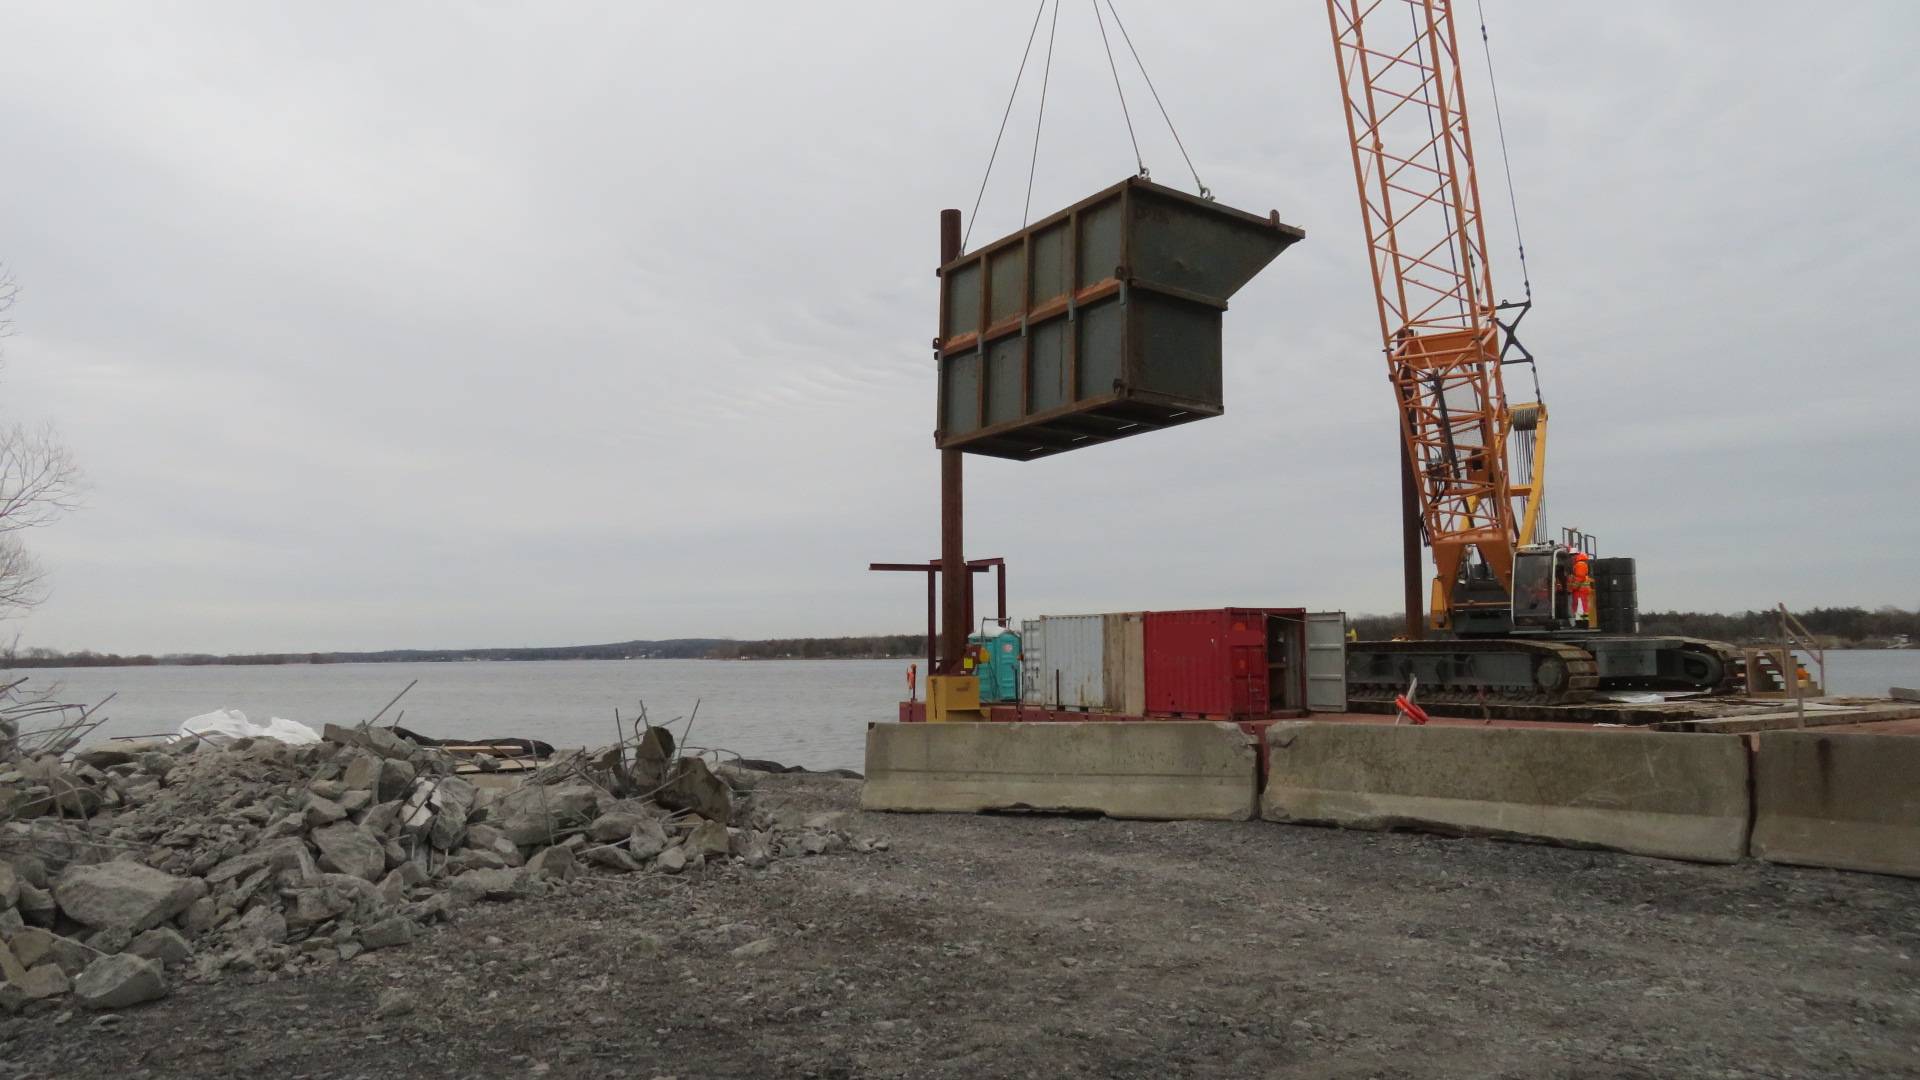 200-ton crane lowering the containment bin to the shore